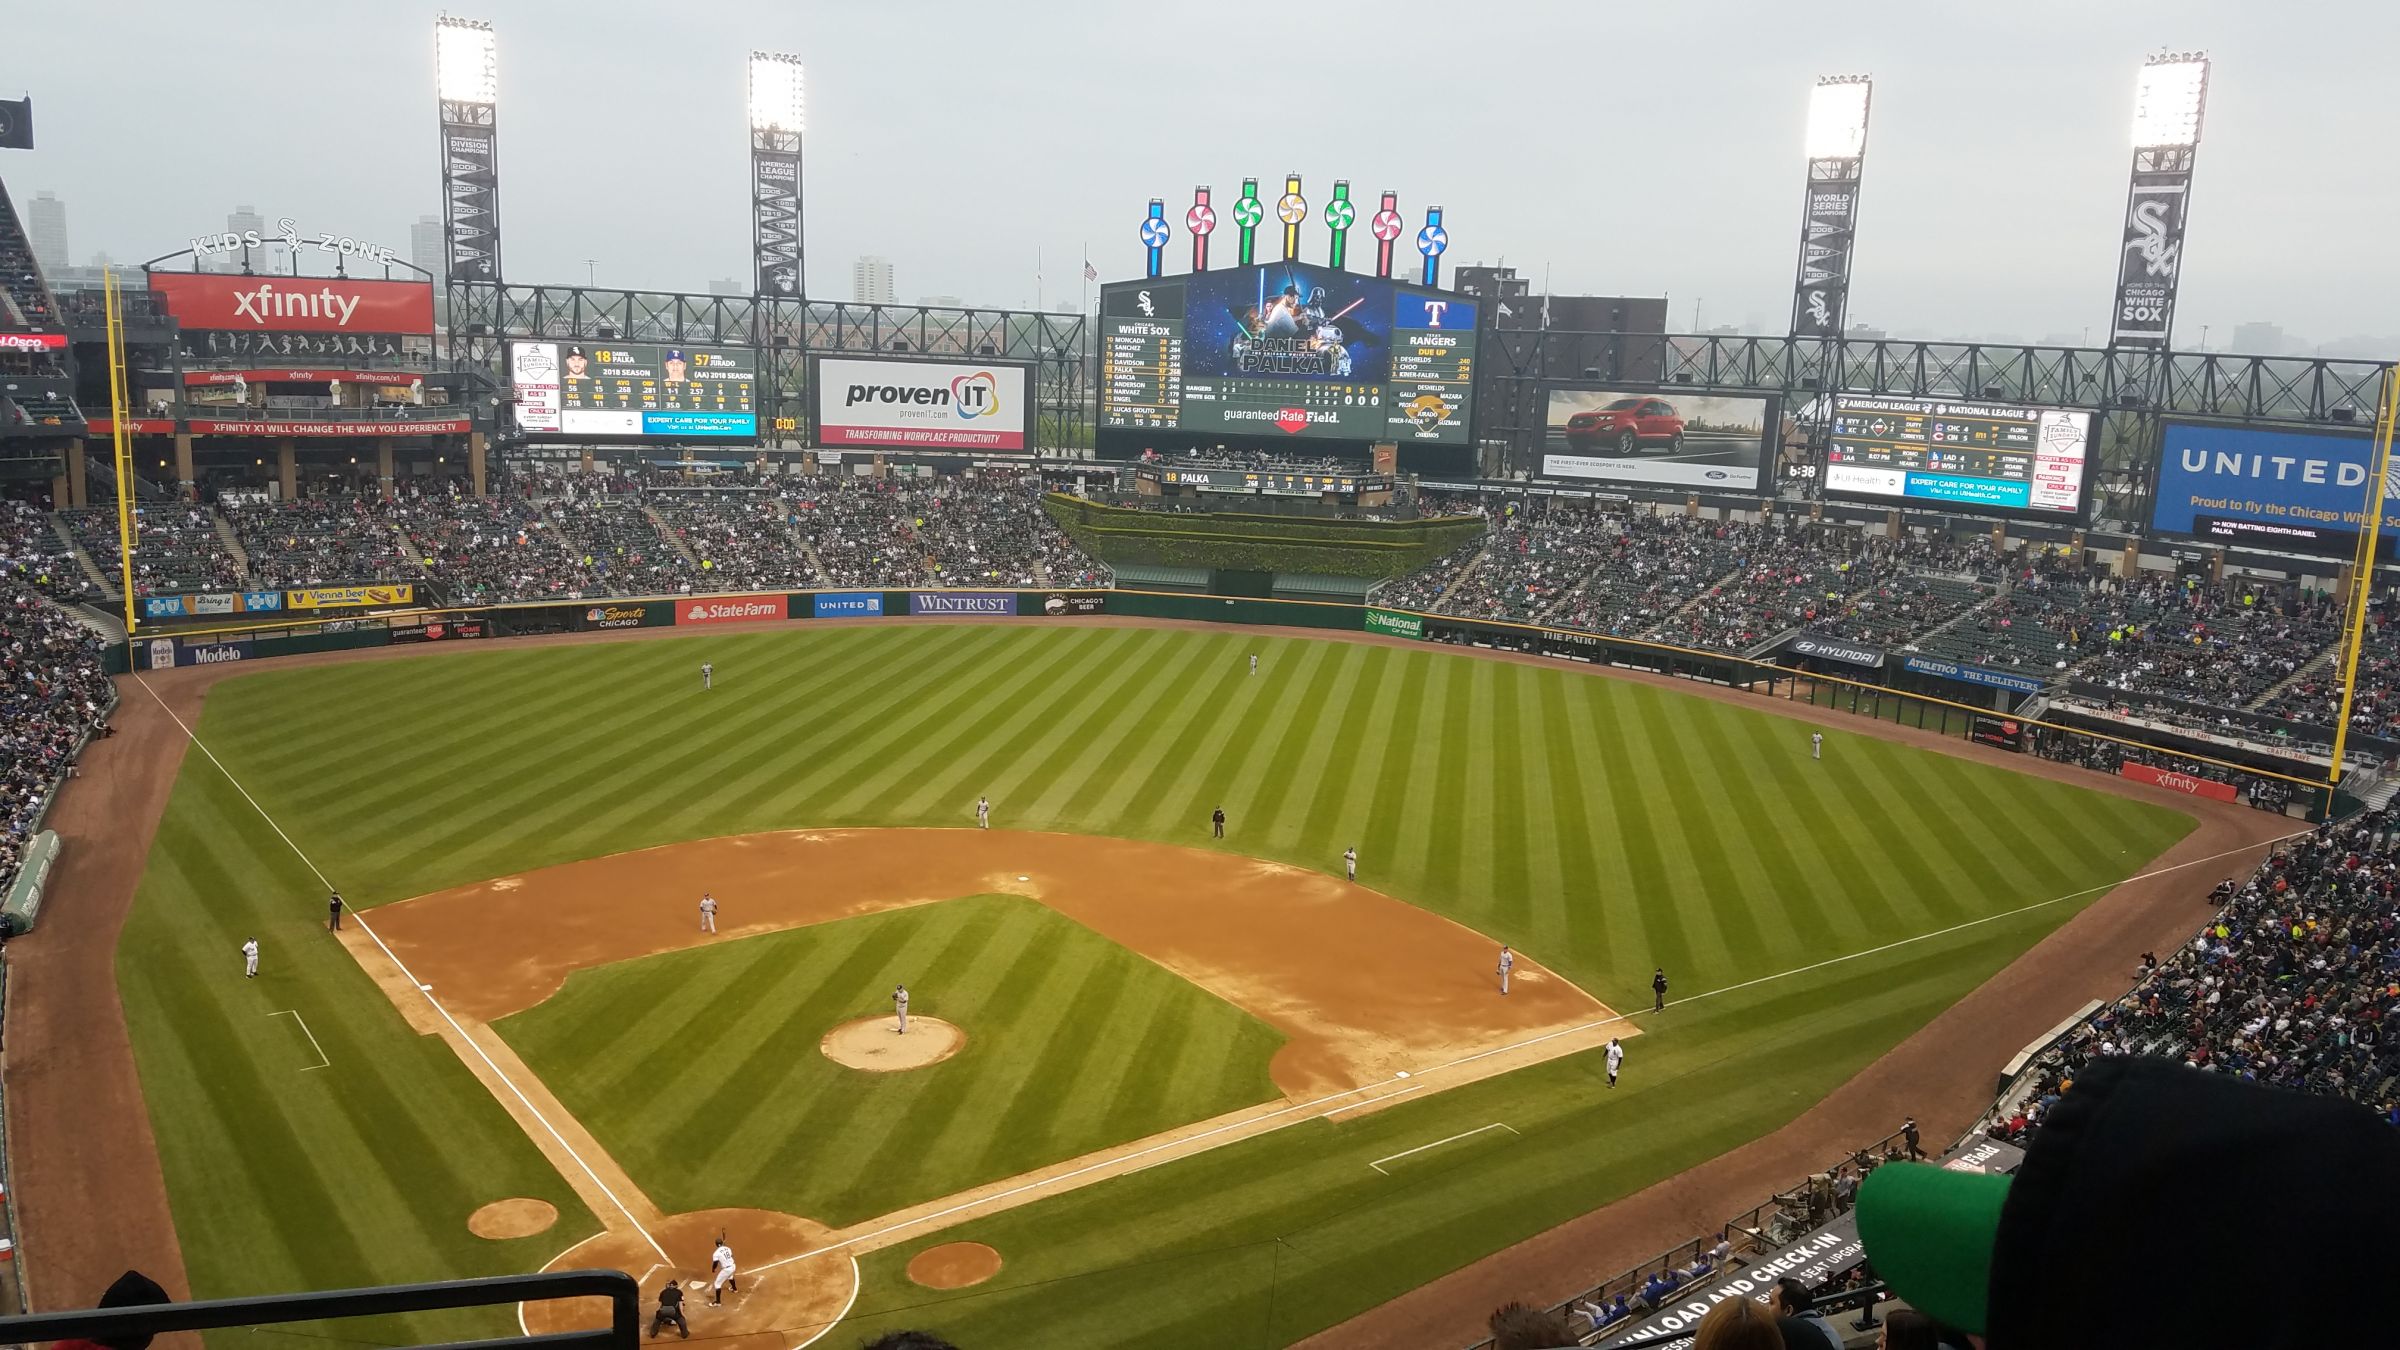 section 529, row 9 seat view  - guaranteed rate field